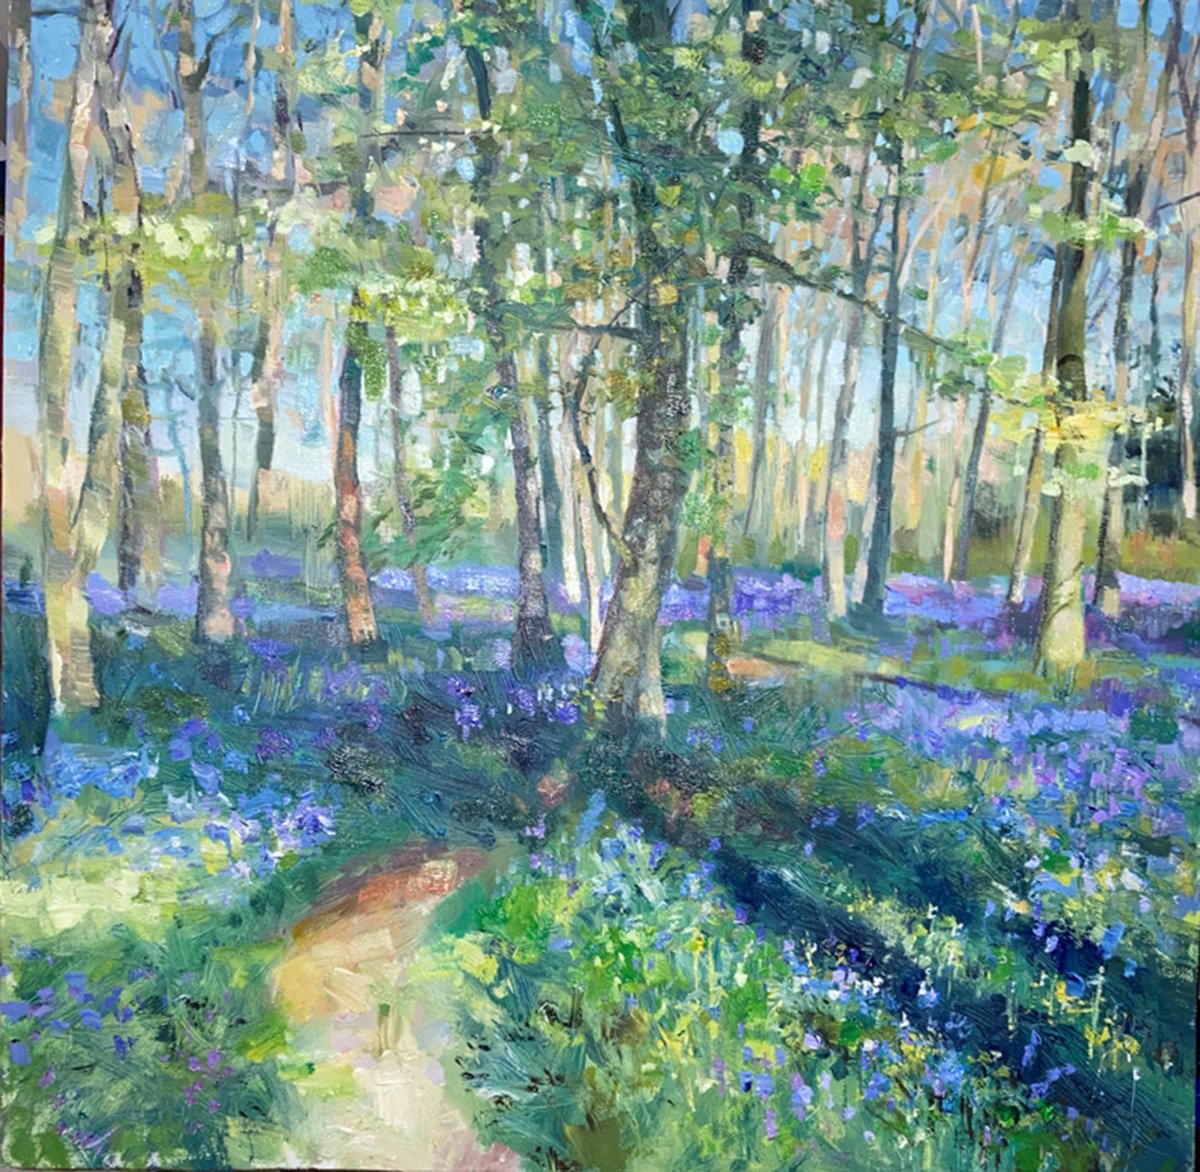 Bluebells of Wendover woods by Christian Twelftree